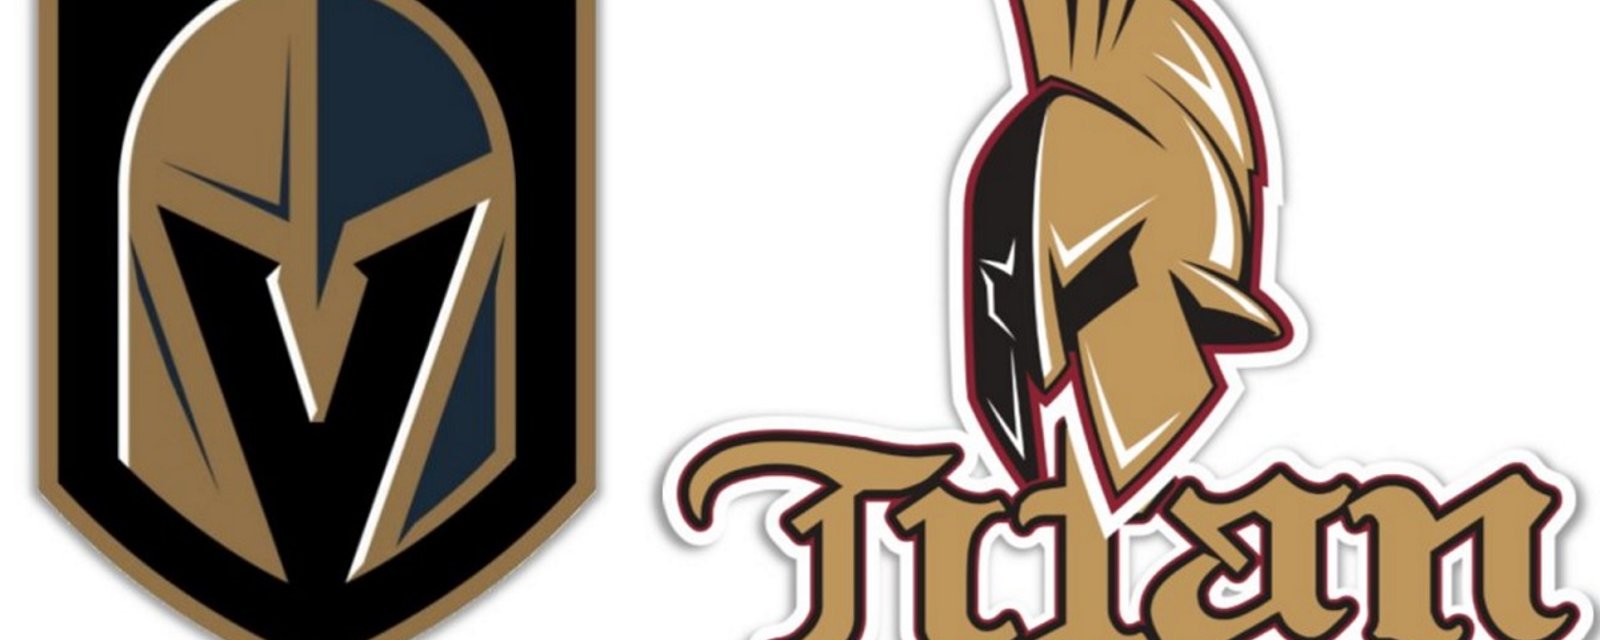 Junior team calls out the Golden Knights for using a very similar logo.